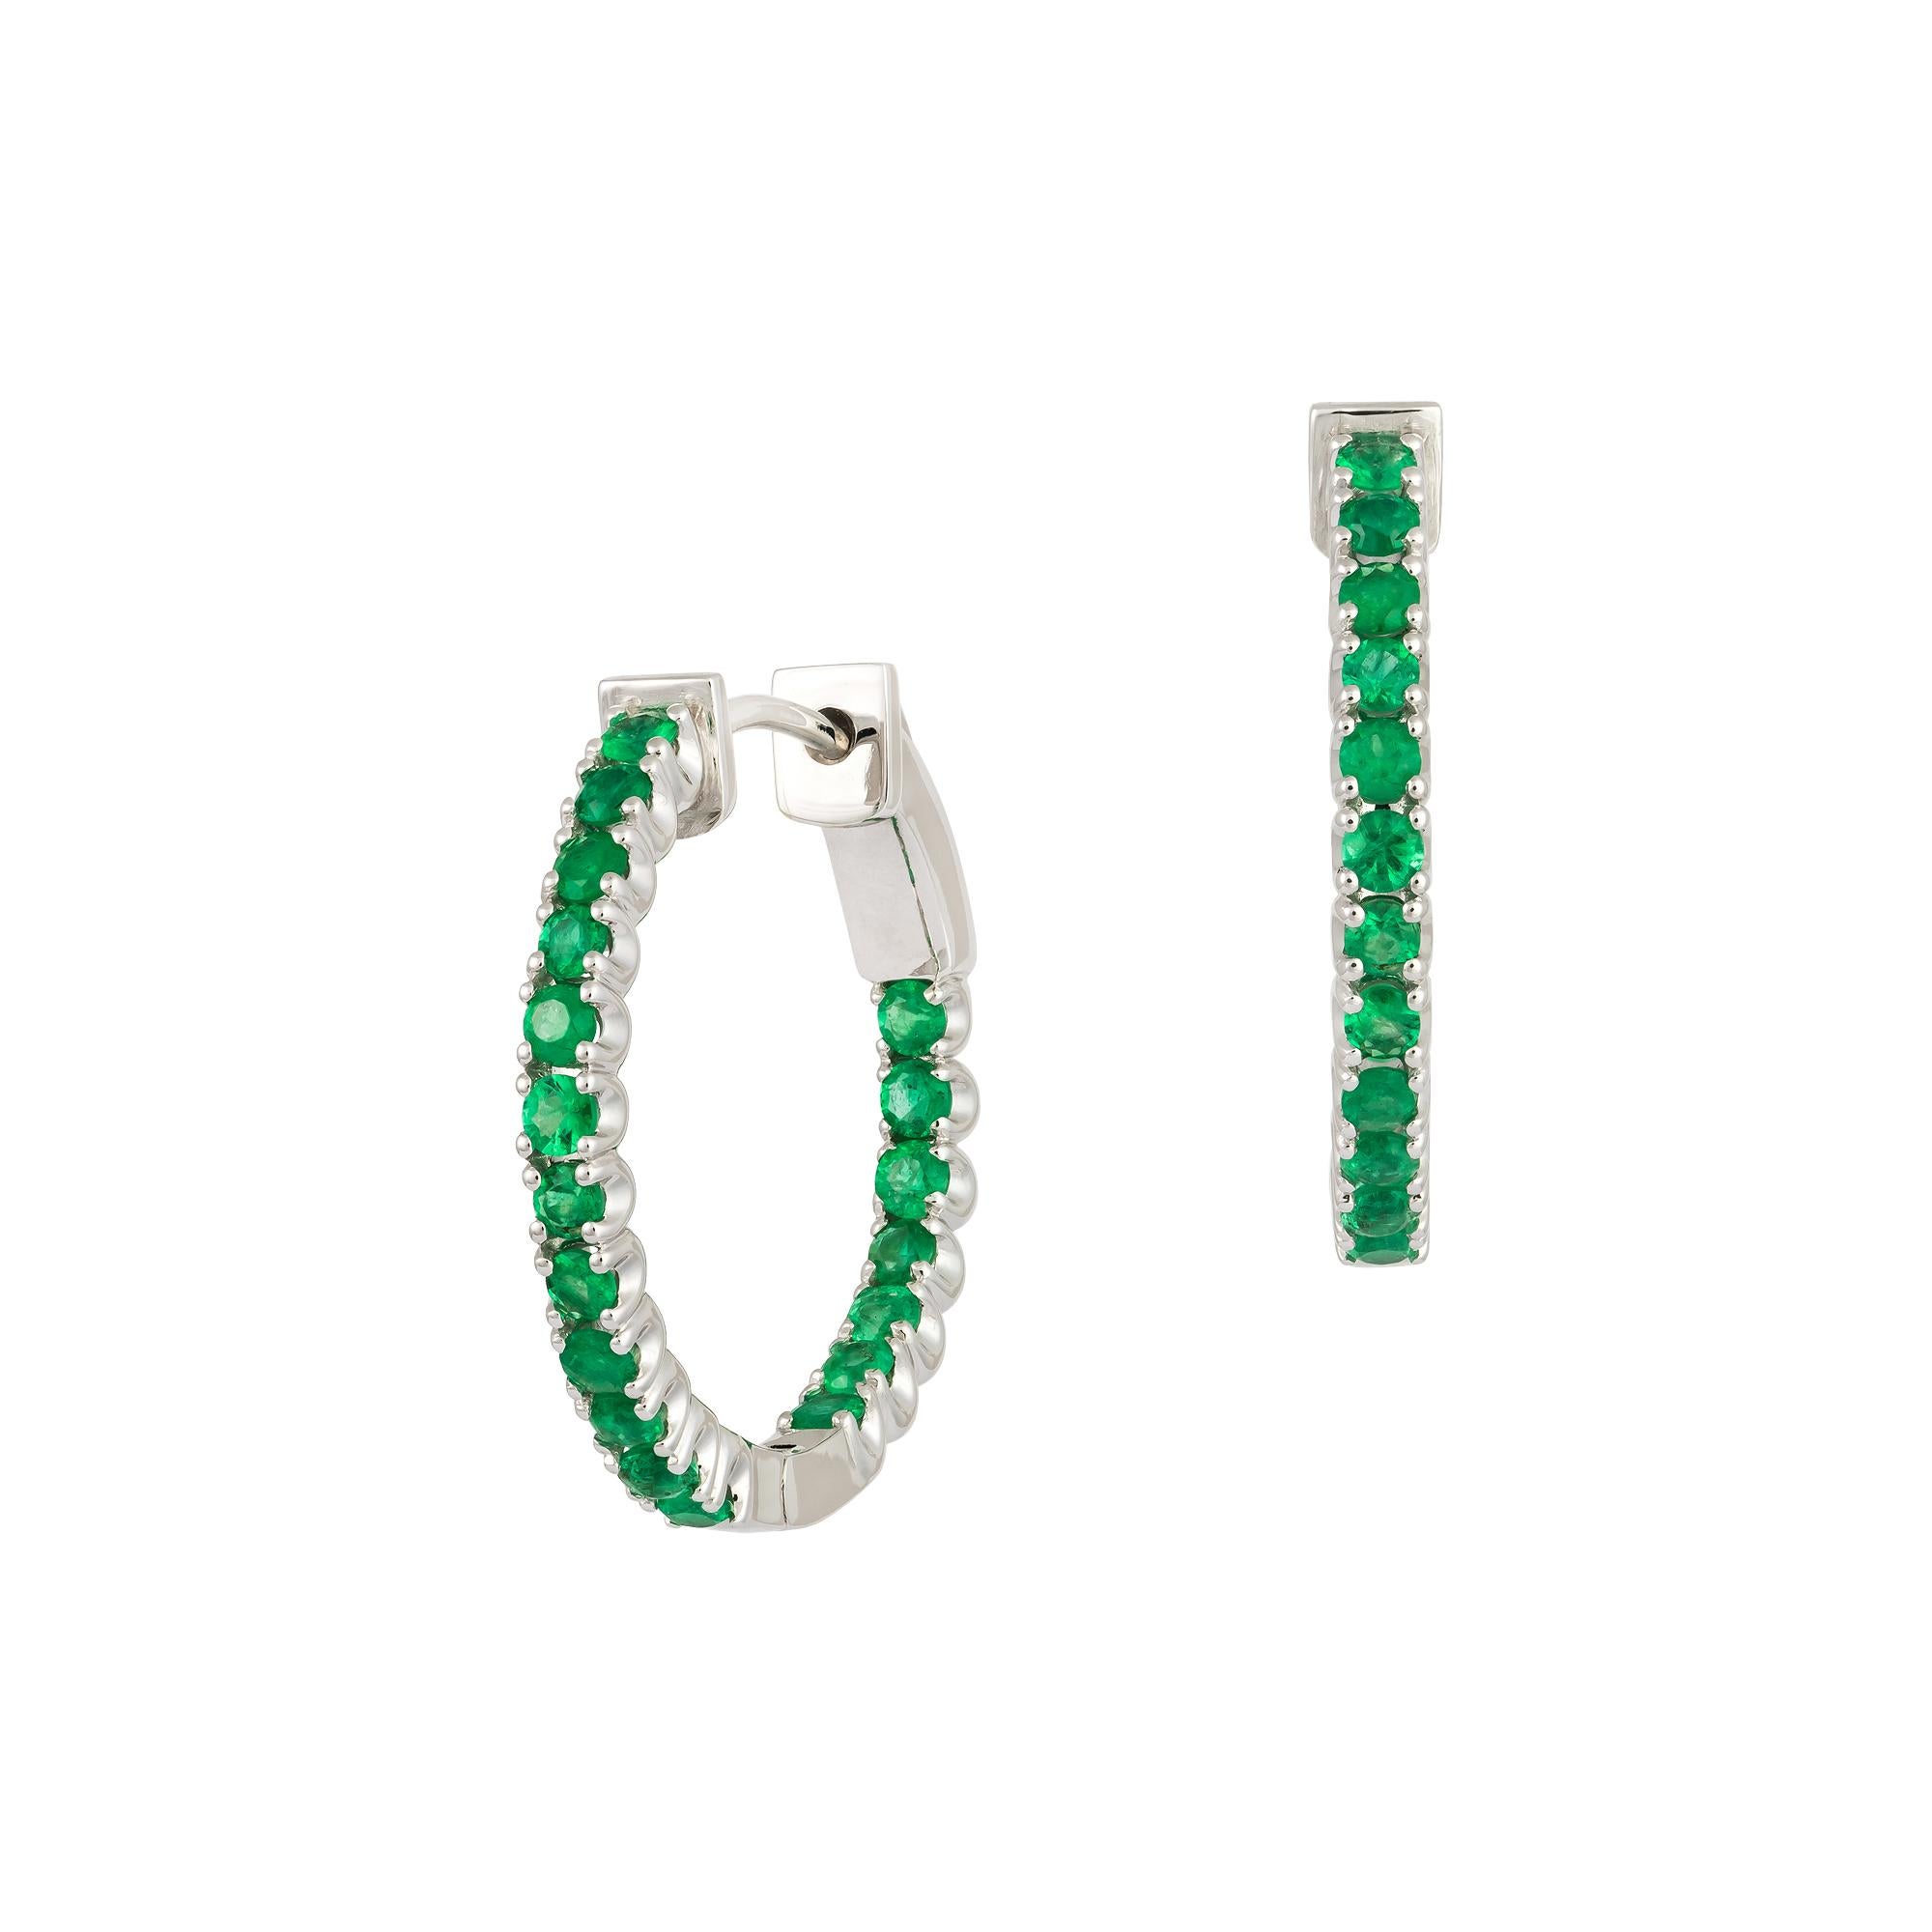 EARRING 18K White Gold Emerald 1.01 Cts/38 Pieces
